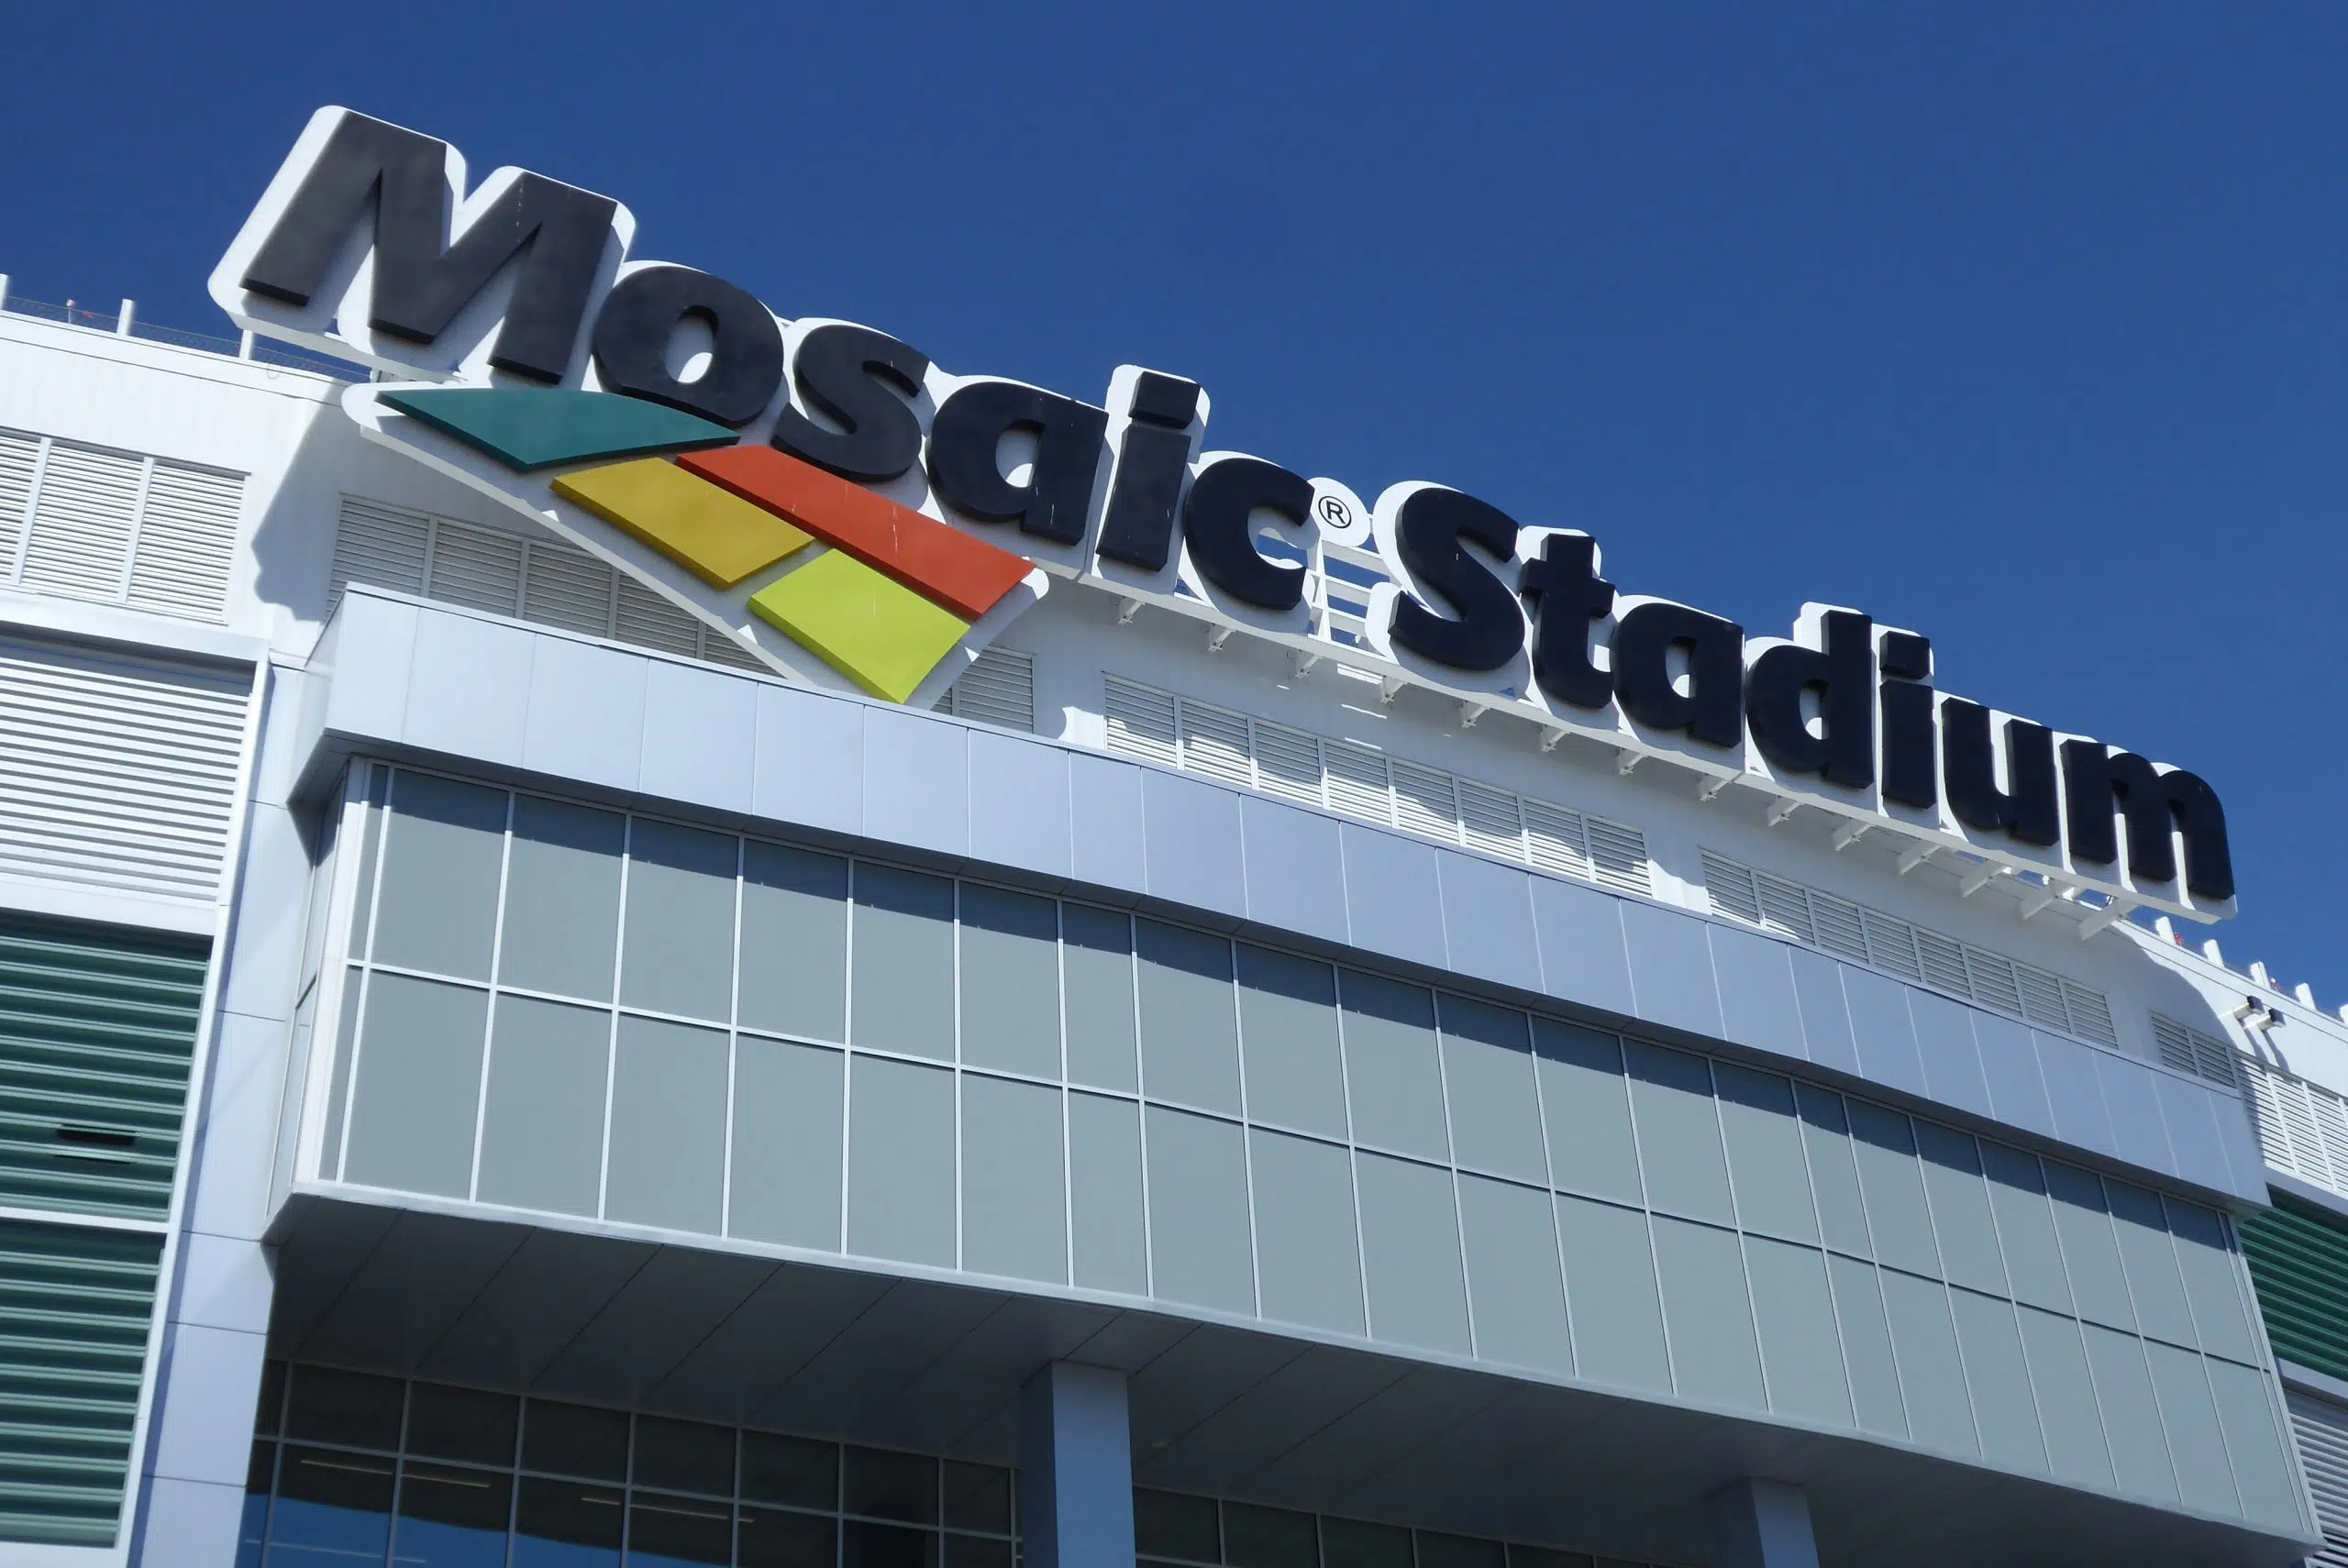 What you need to know for game day at new Mosaic Stadium